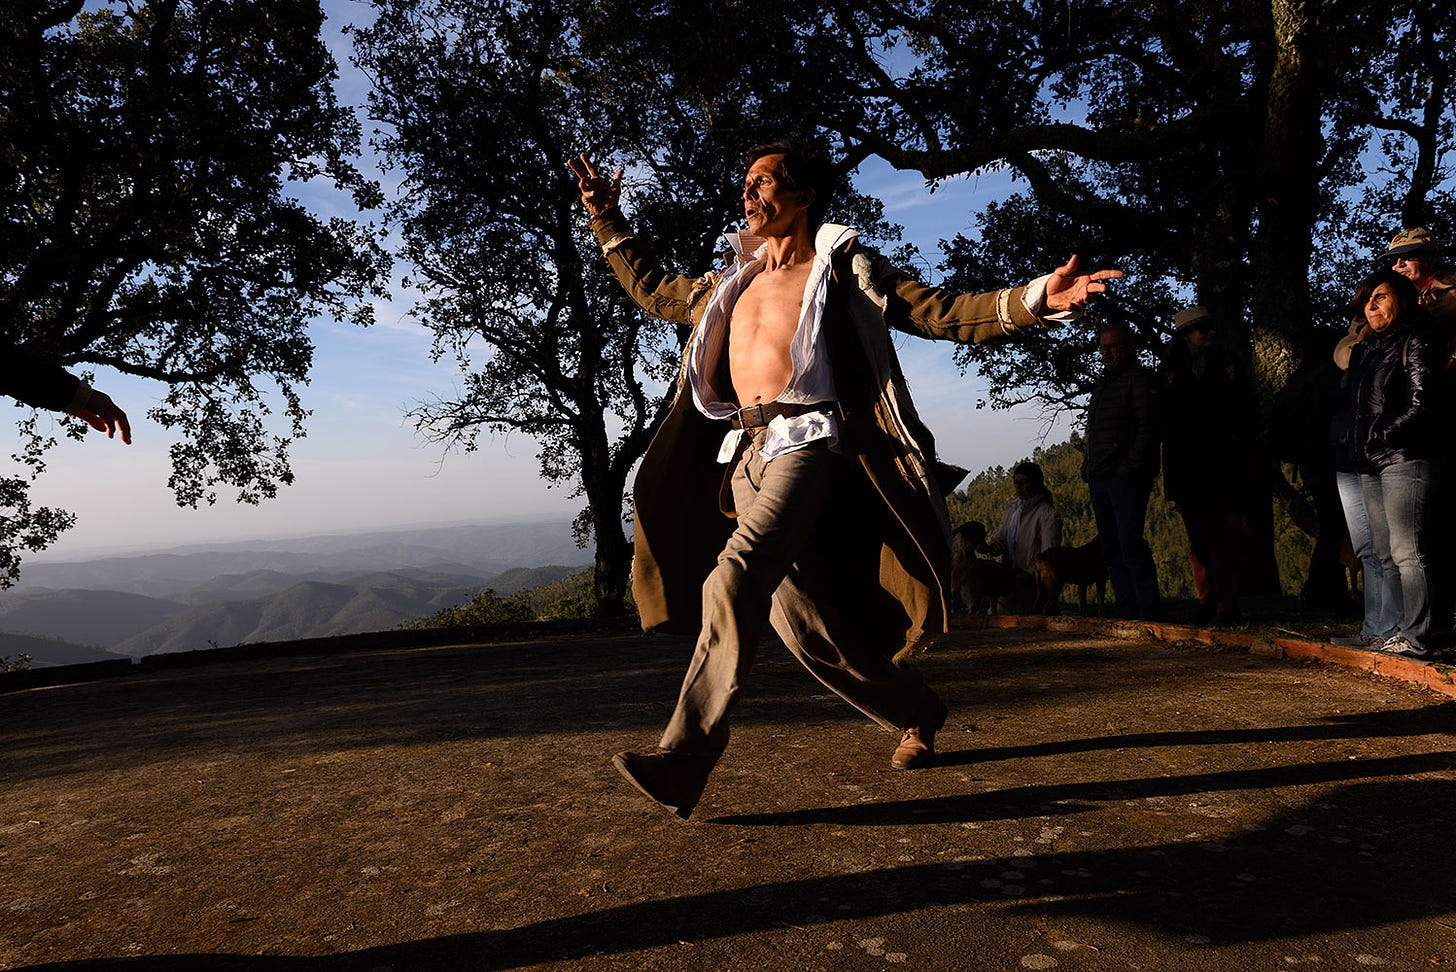 Dancer in spectacular Portuguese mountain setting watched by audience members.